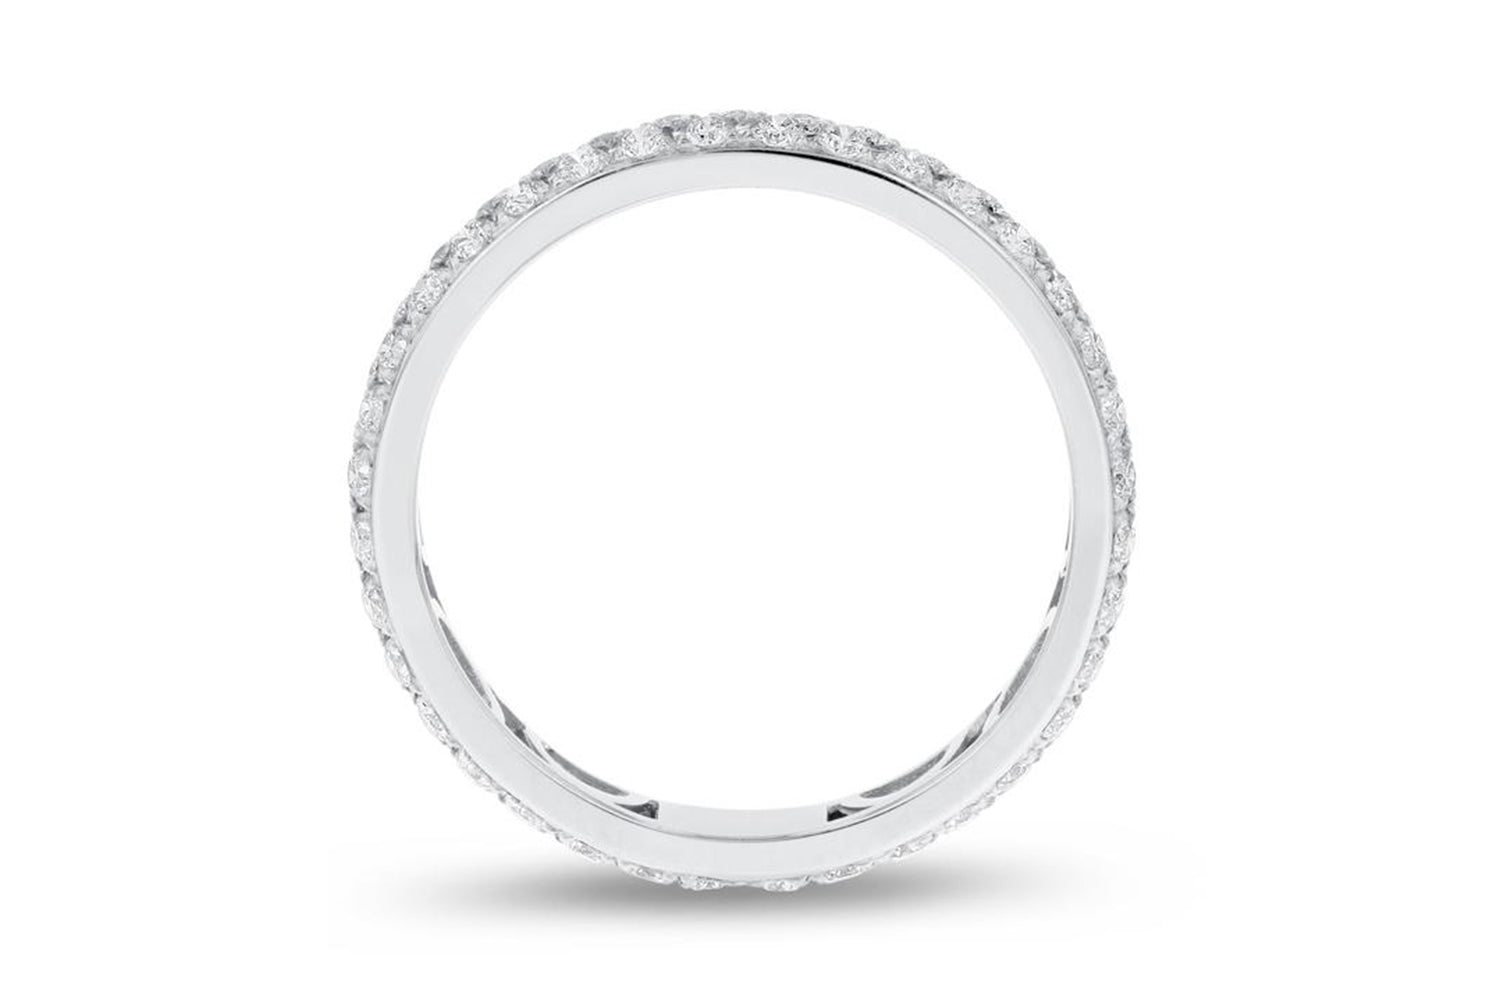 Diamond White Gold 2 Row Micropave Eternity Band, 0.84 Carats